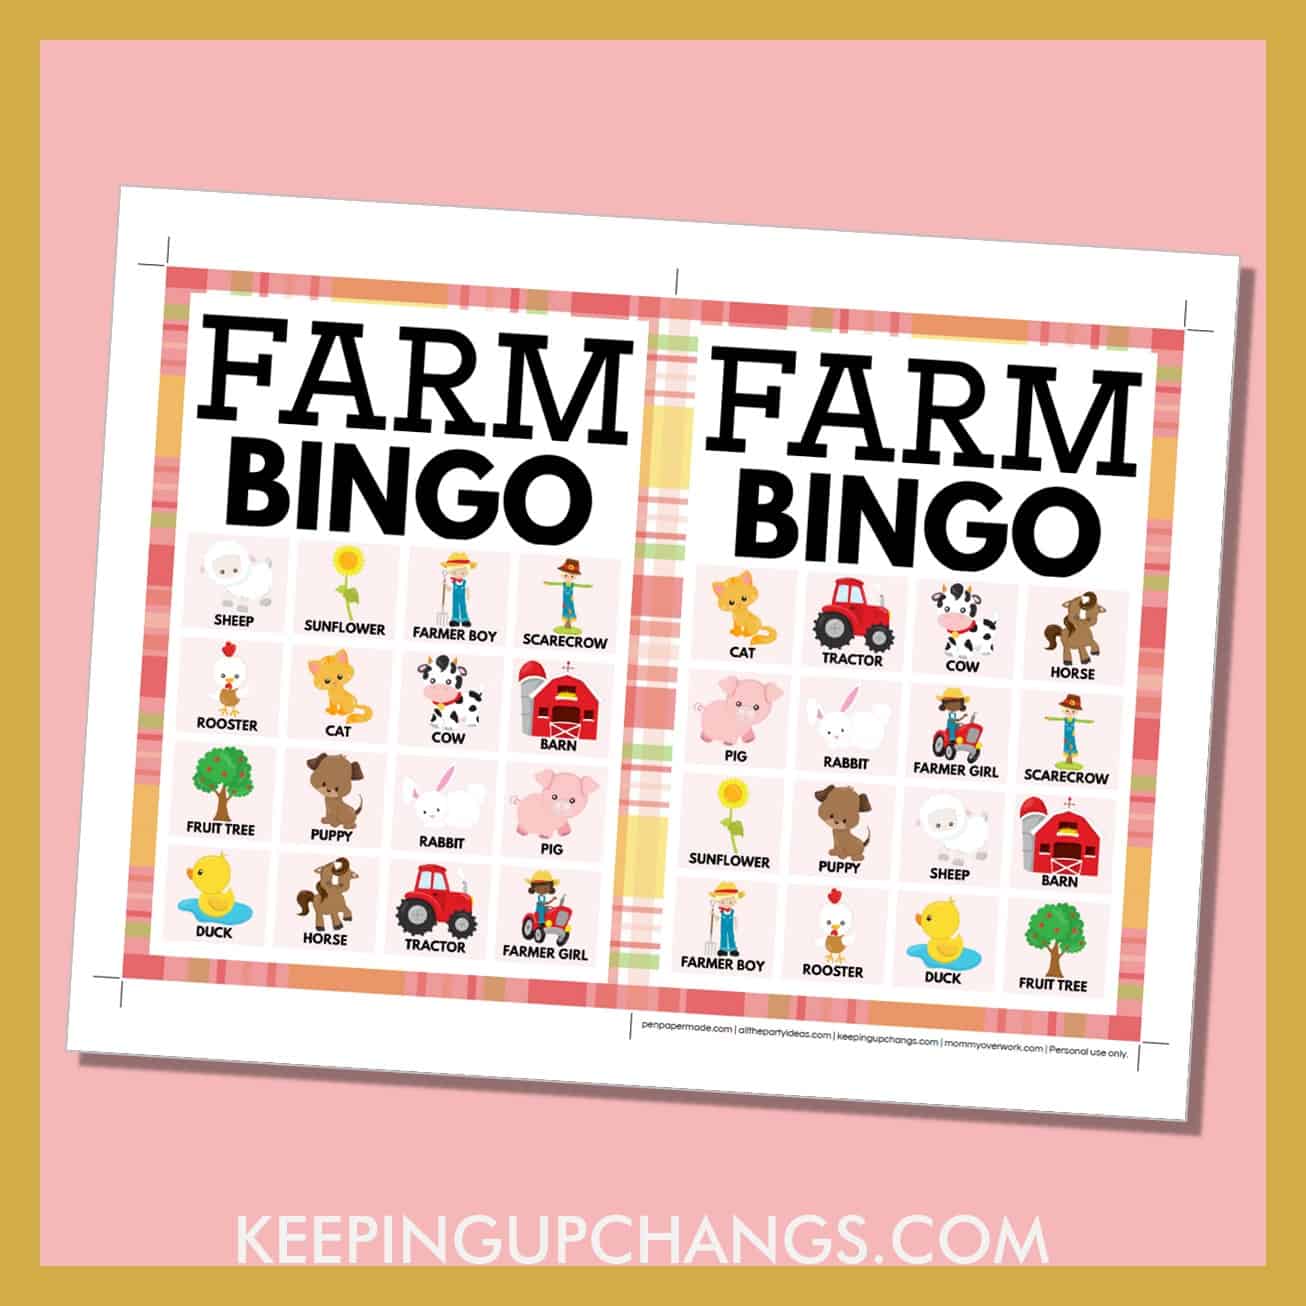 free farm bingo card 4x4 5x7 game boards with images and text words.